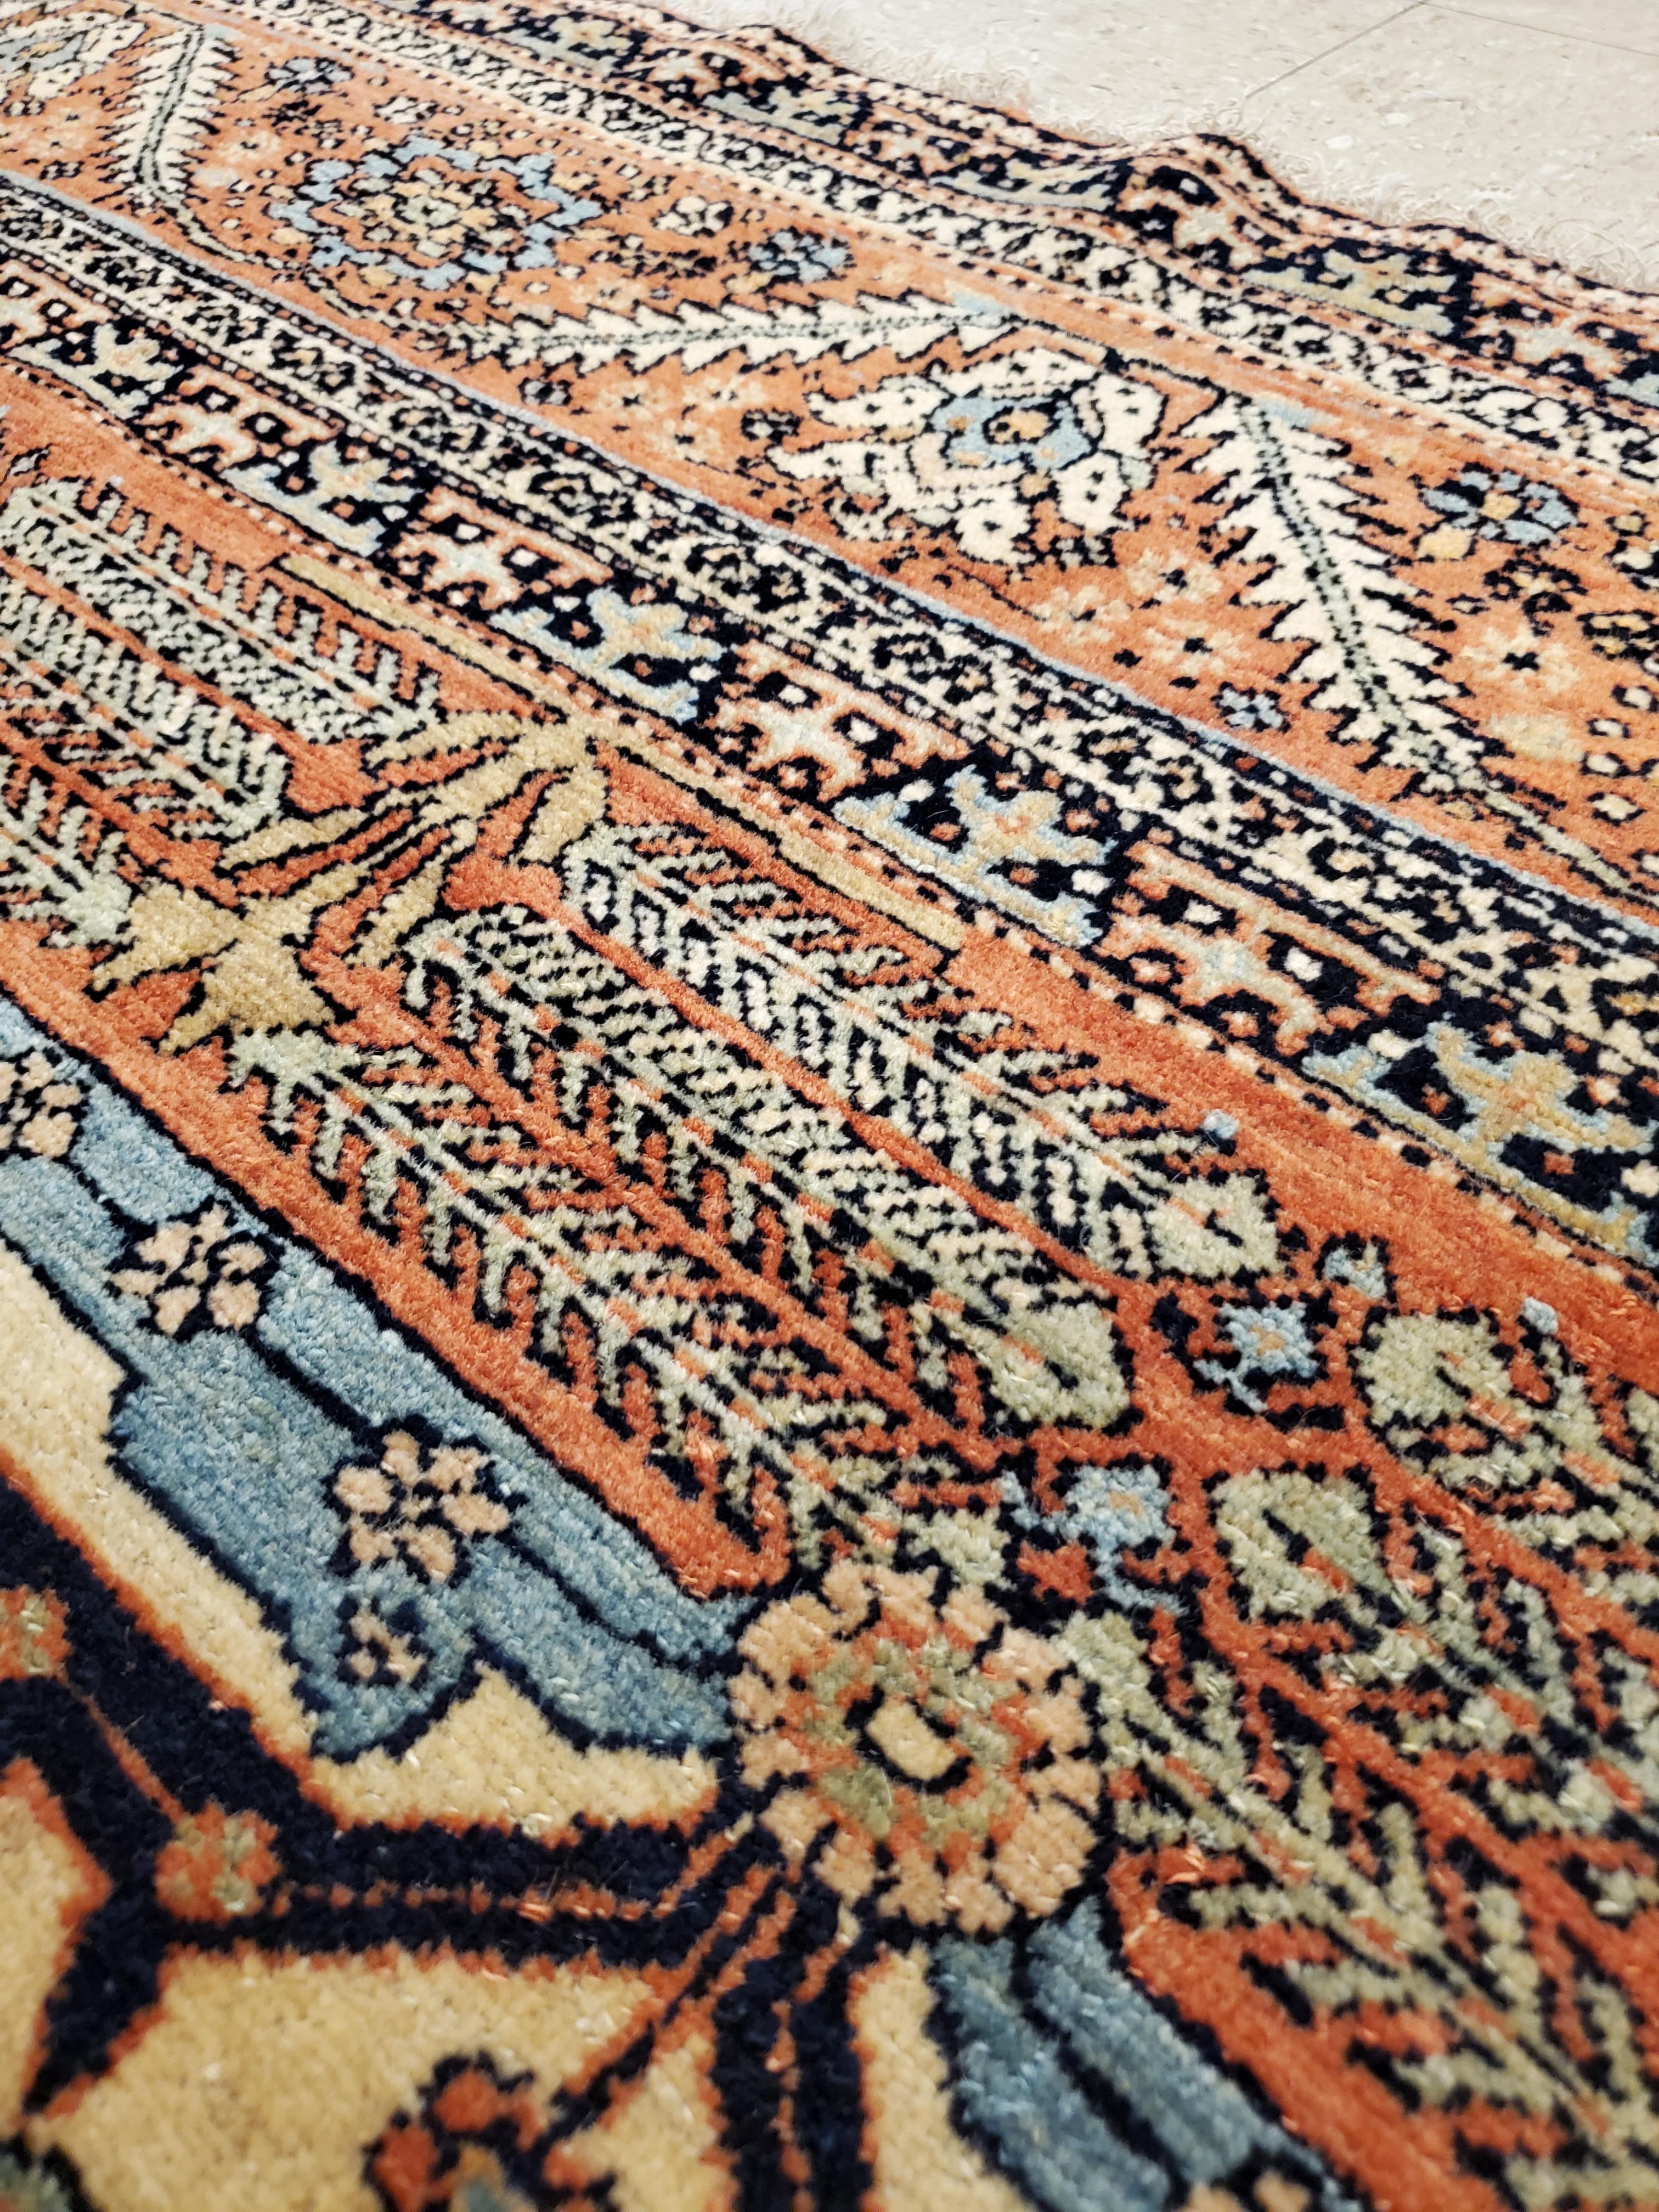 Antique Persian Bakhshaish Carpet, Handmade Wool Rug, Ivory and Rust For Sale 1